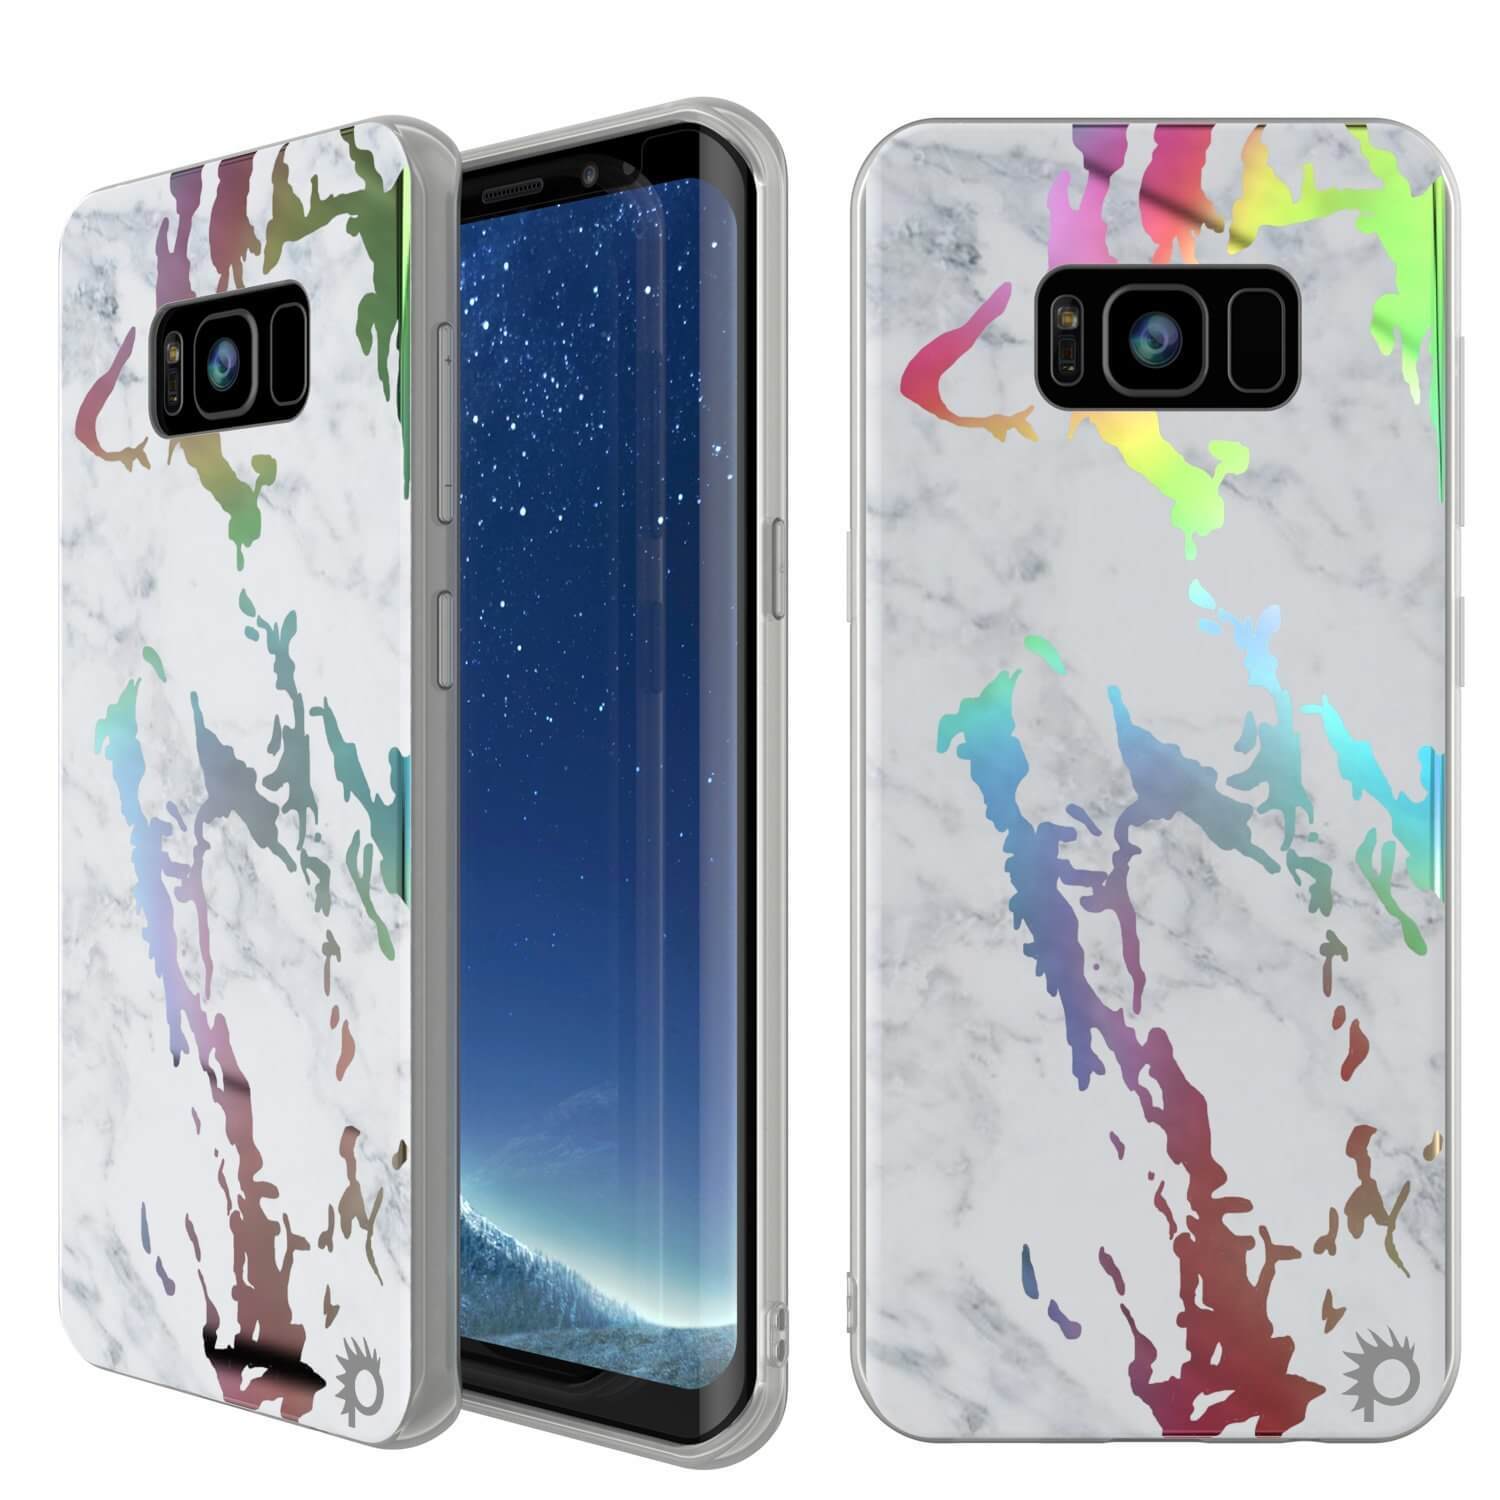 Punkcase Galaxy S8 Marble Case, Protective Full Body Cover W/PunkShield Screen Protector (Blanco Marmo)